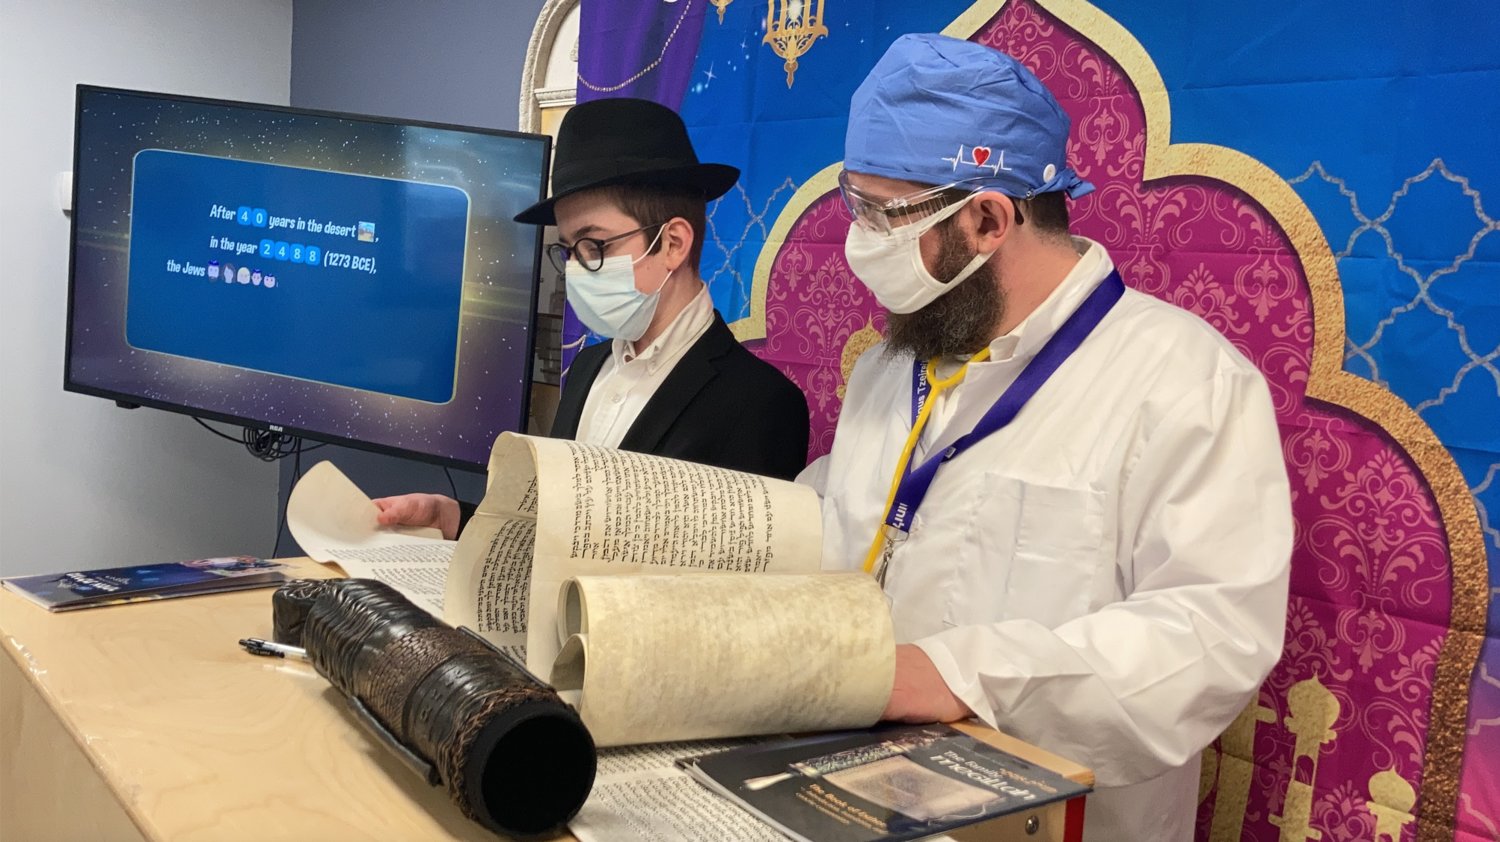 Rabbi Shimon Kramer, of the Chabad Center for Jewish Life, in Merrick, delivered an in-person Megillah reading to congregants in celebration of Purim.